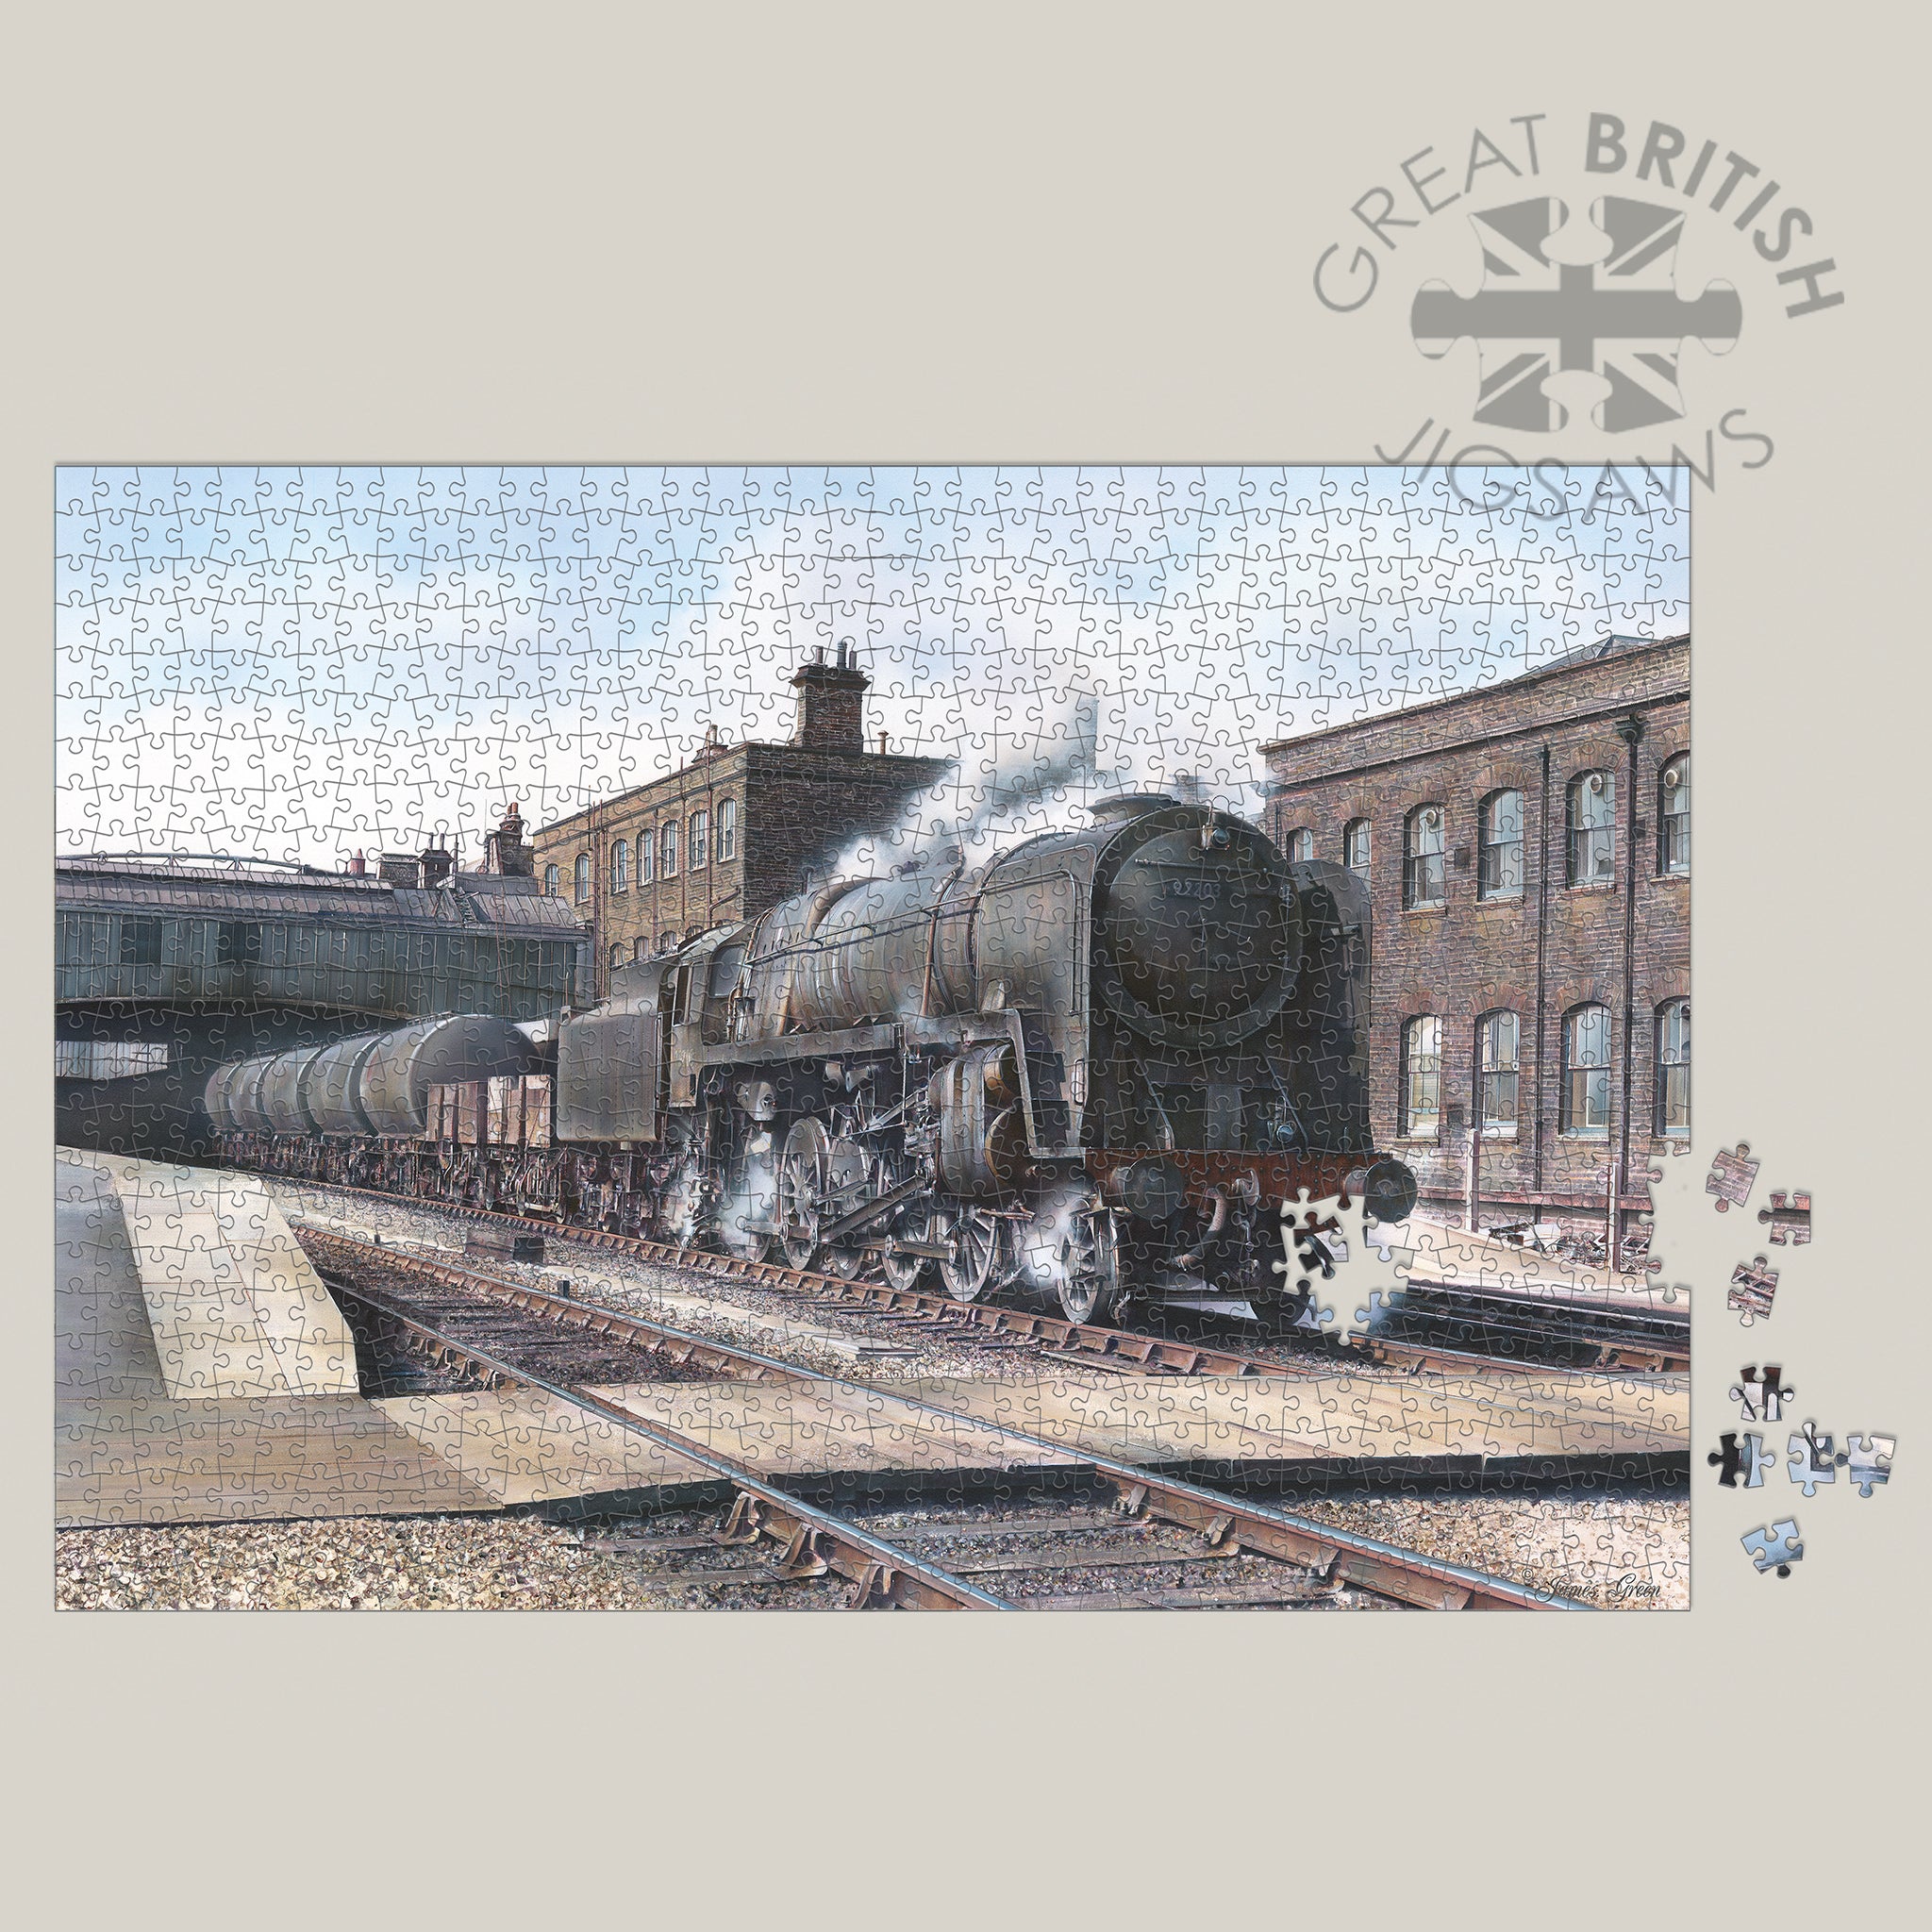 Black Prince Jigsaw Puzzles by James Green GRA